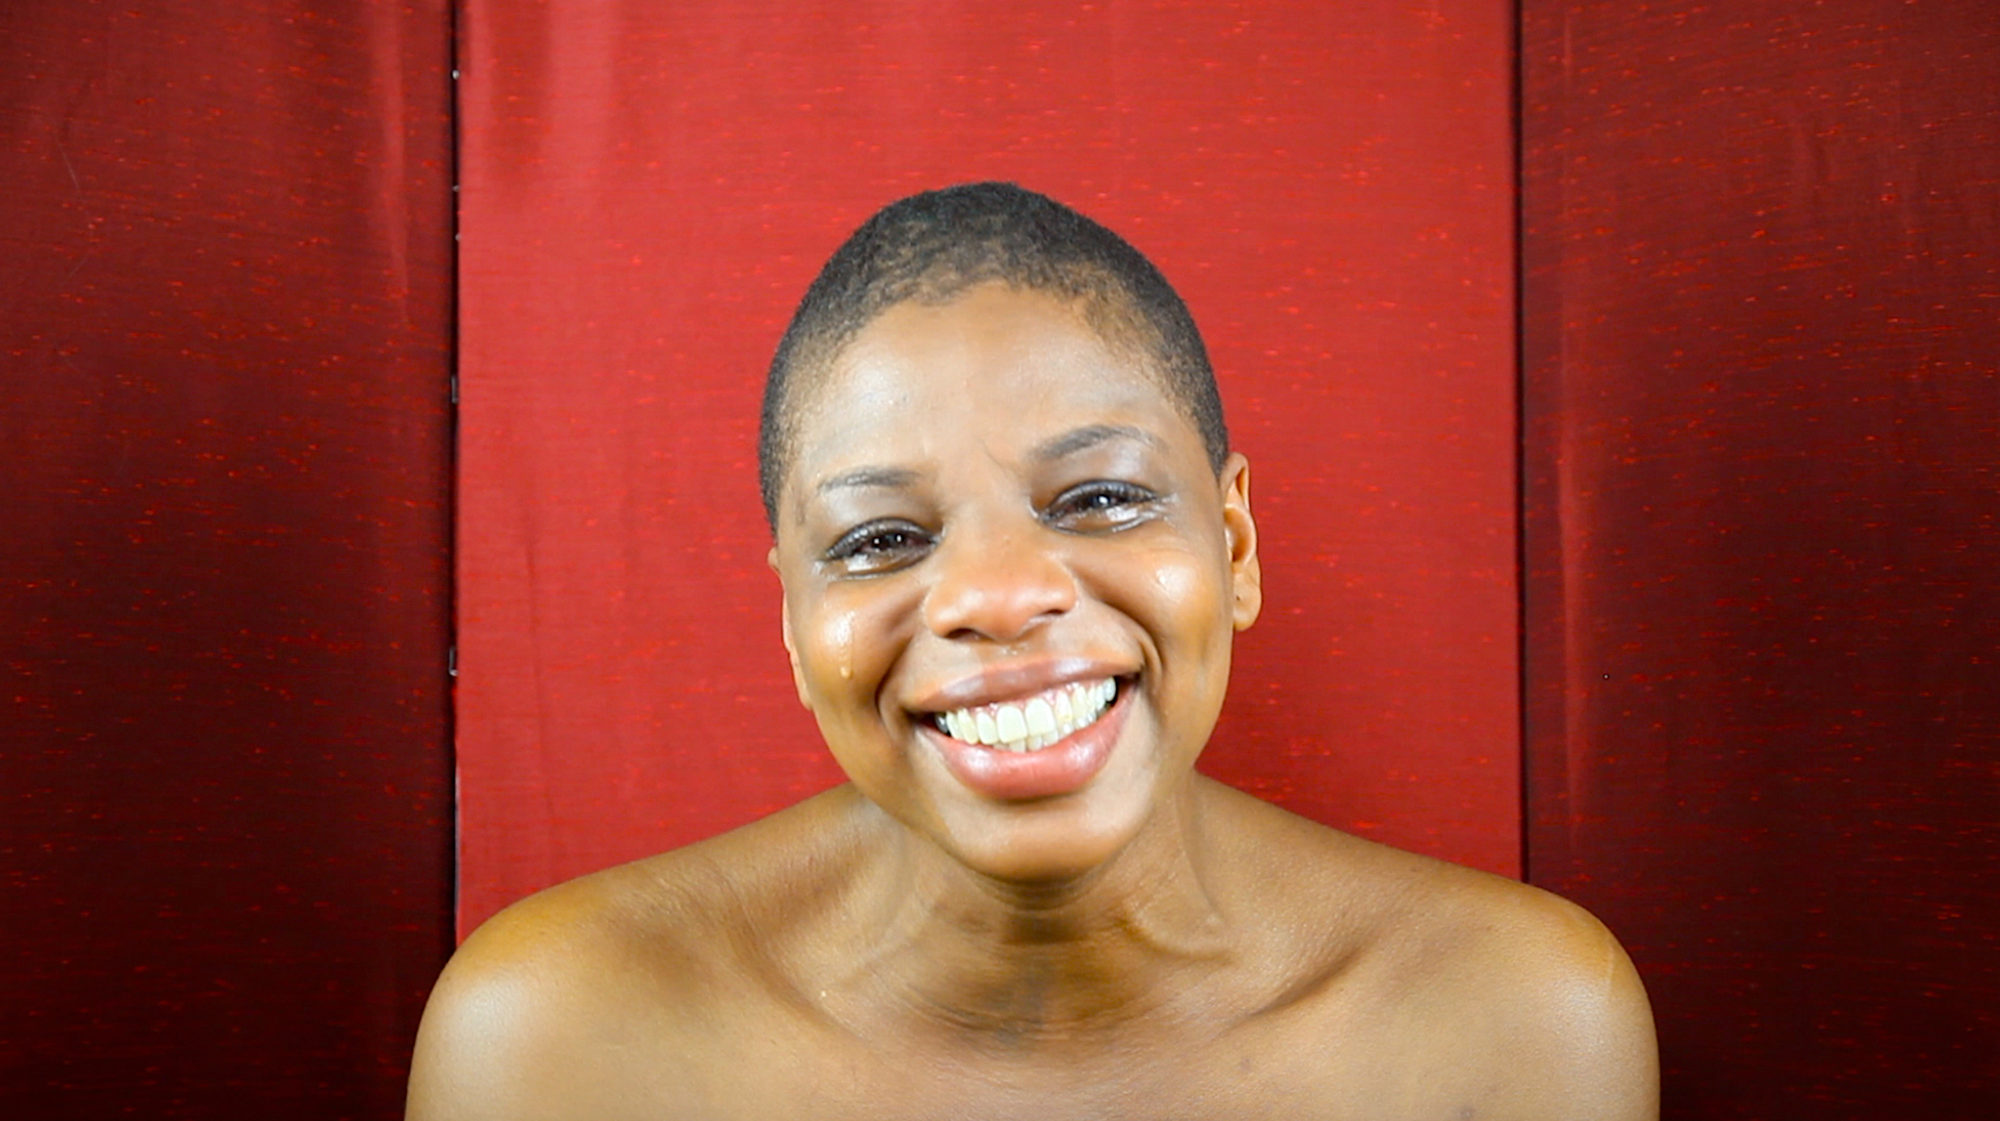 headshot of person crying and smiling in front of red backdrop